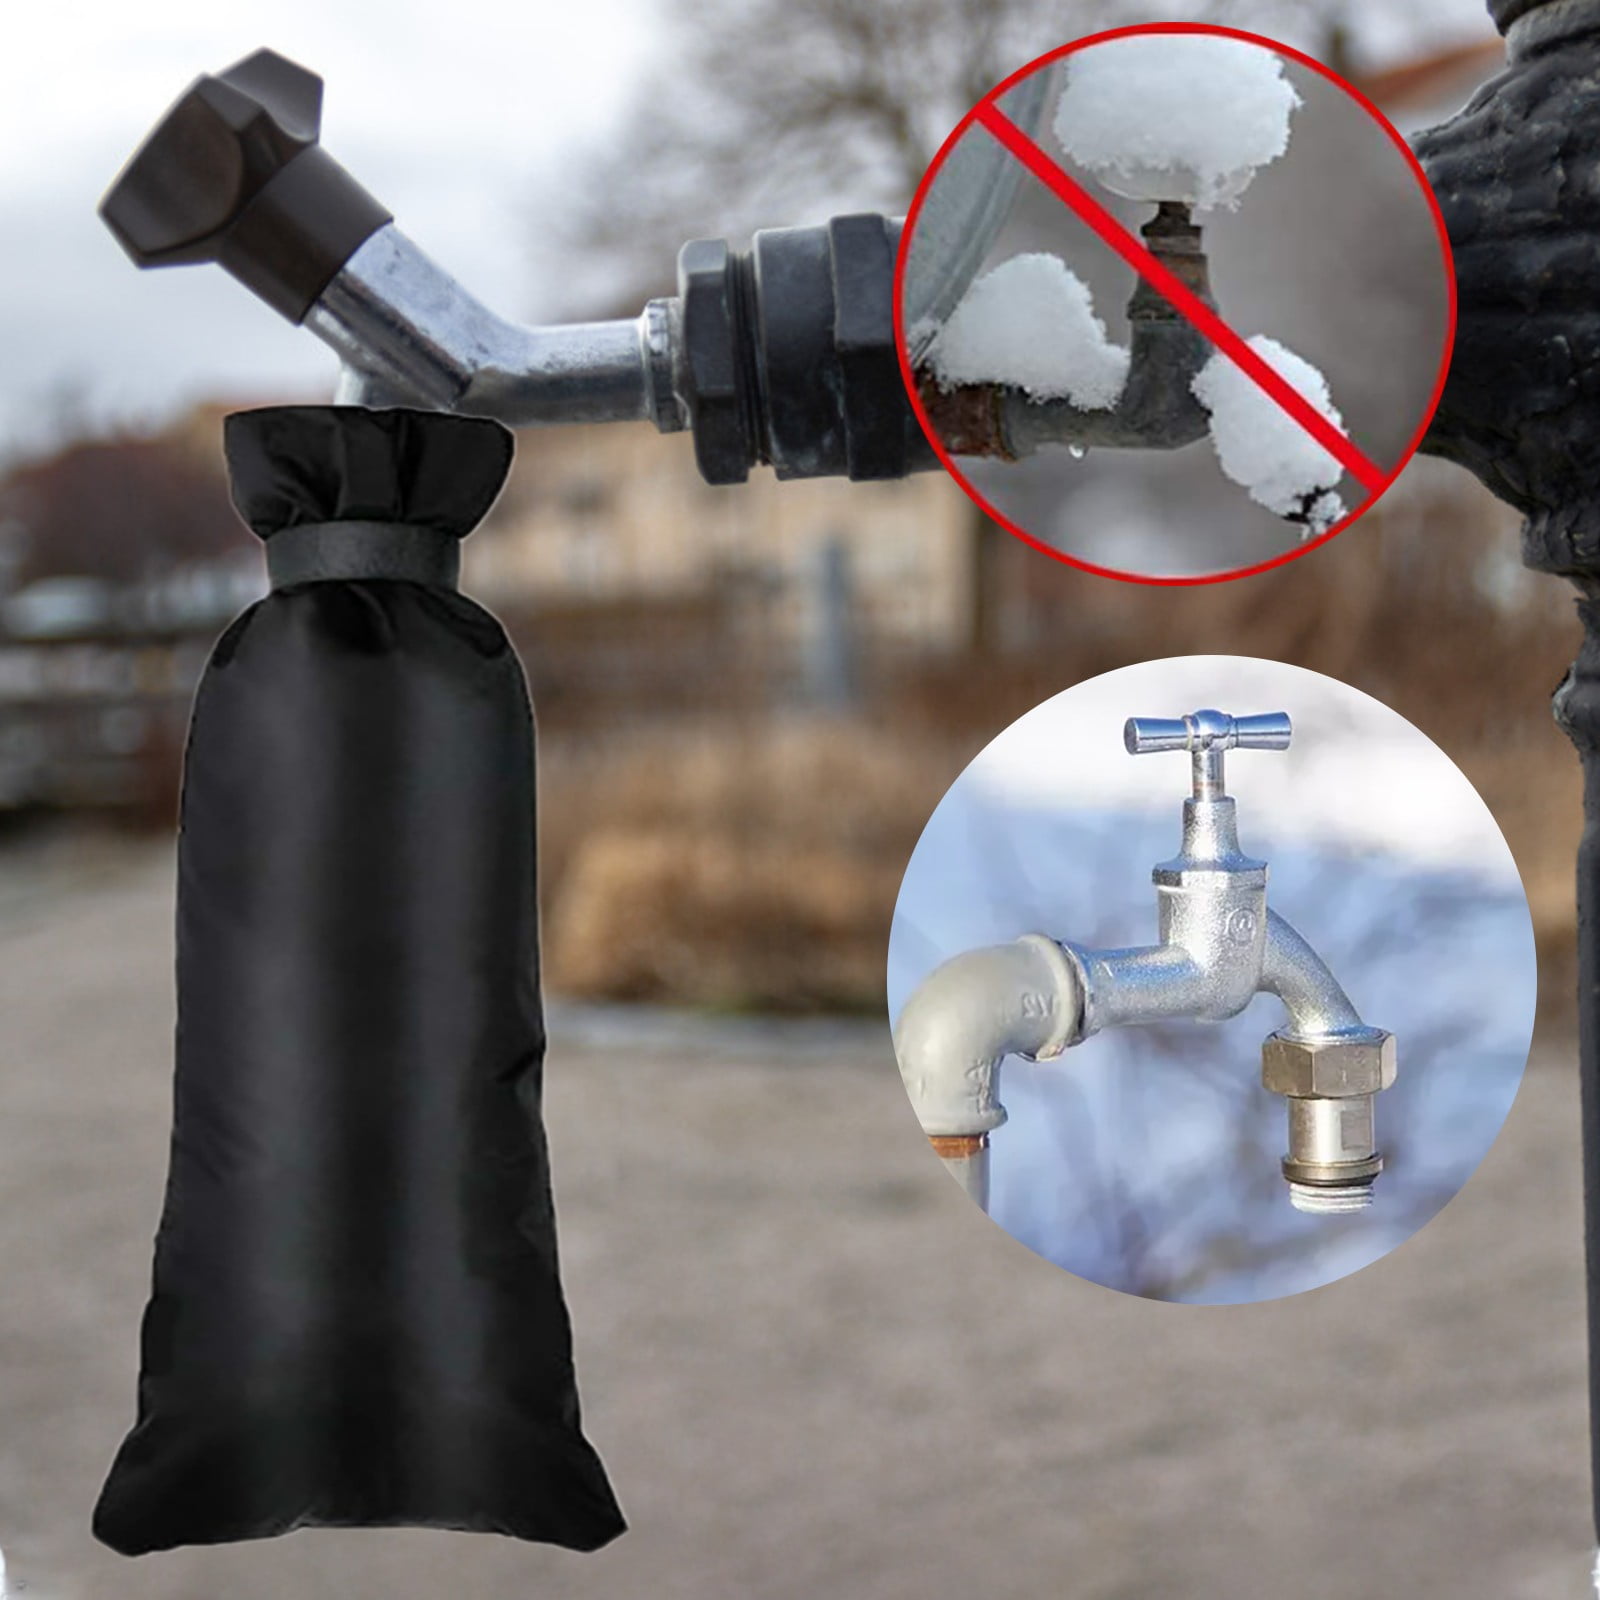 Outside Faucet Covers for Winter Outdoor Faucet Cover Socks for Winter Freeze Protection Insulated Faucet Cover Spigot Cover for Winter Anti-Rust and Antifreeze 